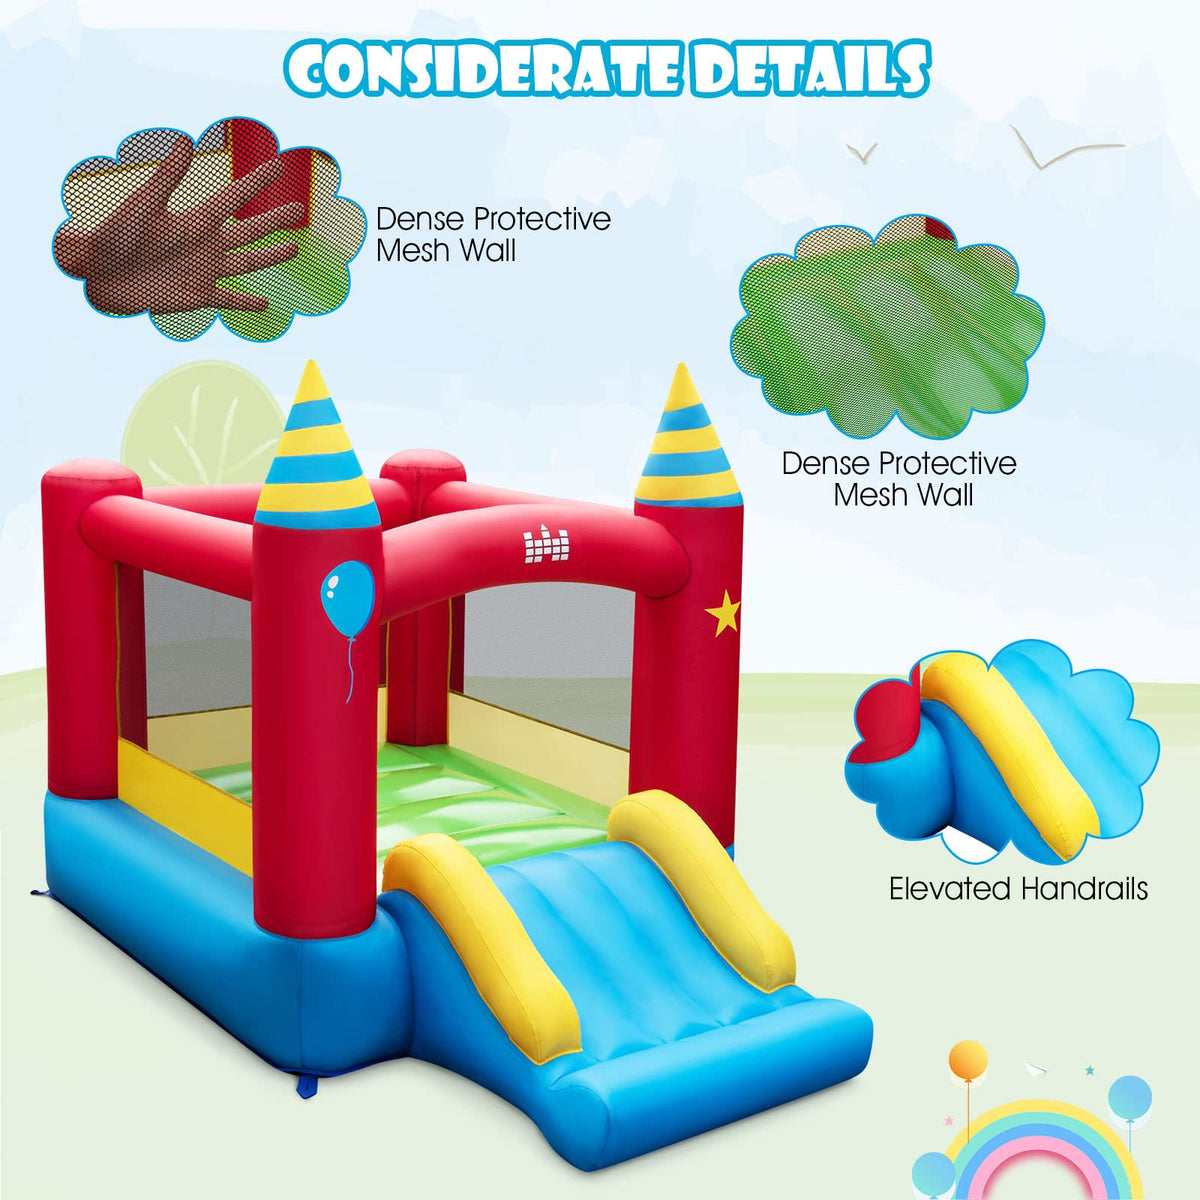 Inflatable Bounce House, Kids Bouncy Castle with Large Jumping Area & Extra Wide Slide